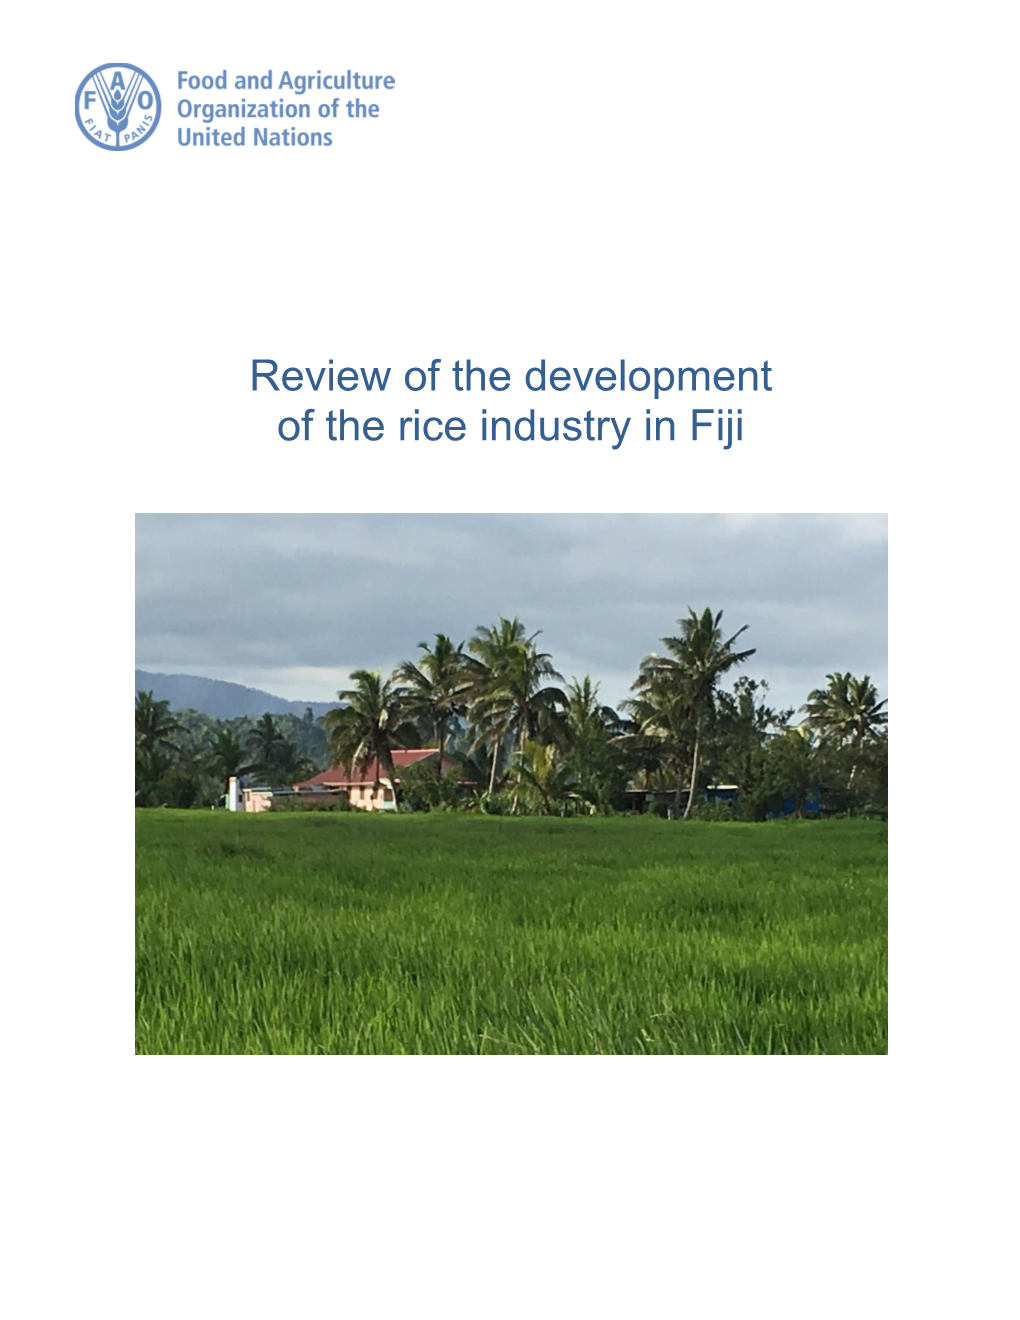 Review of the Development of the Rice Industry in Fiji Review of the Development of the Rice Industry in Fiji